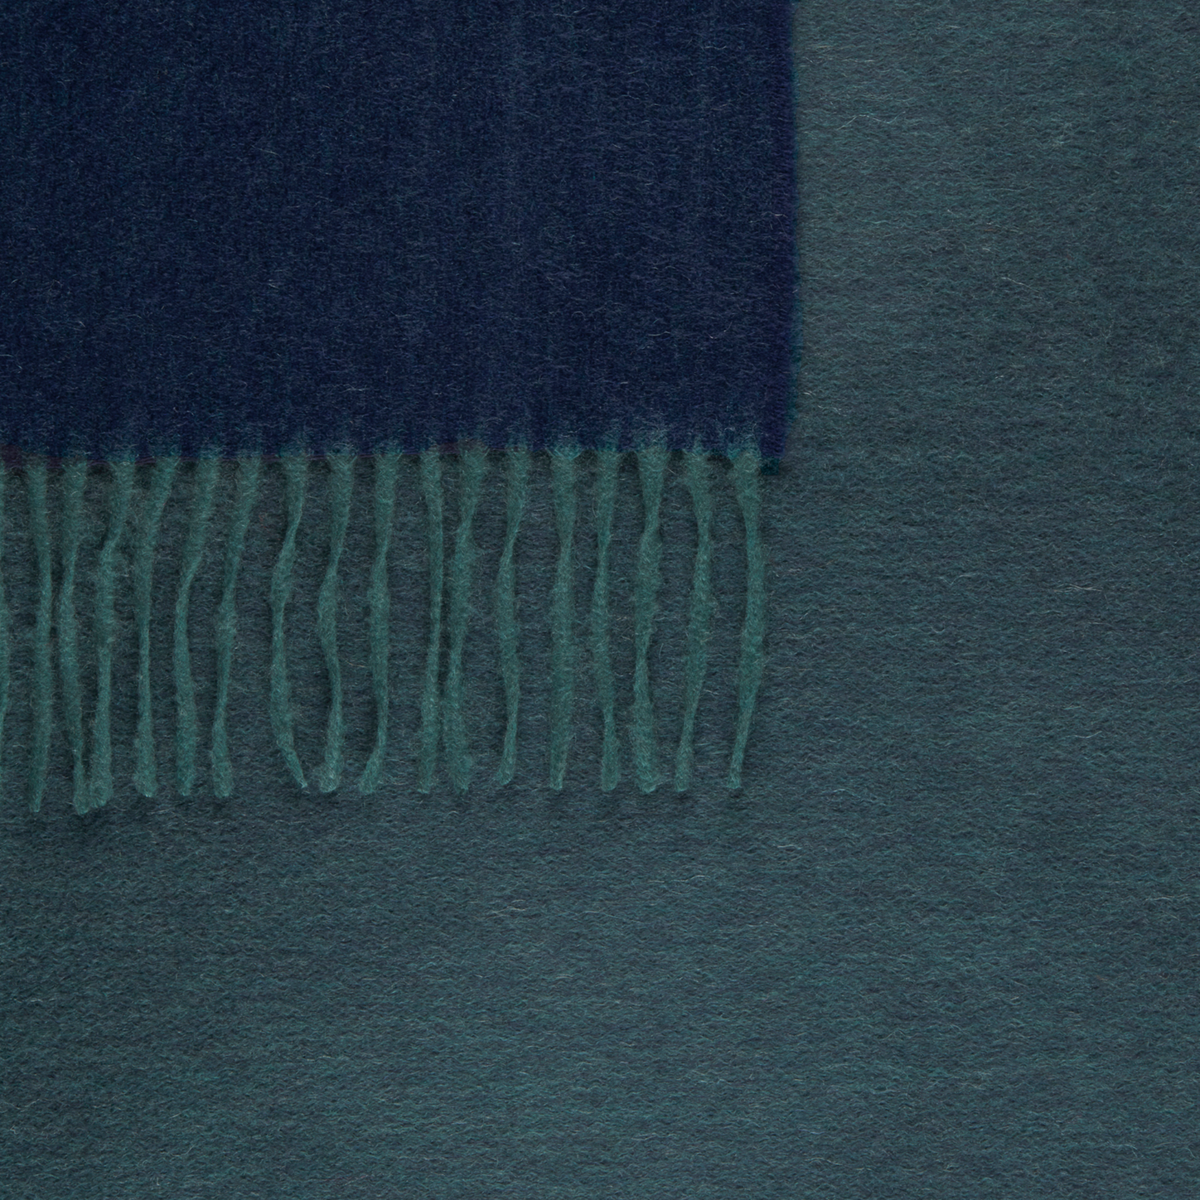 Swatch Sample of Matouk Paley Throws in Jade/Navy Color